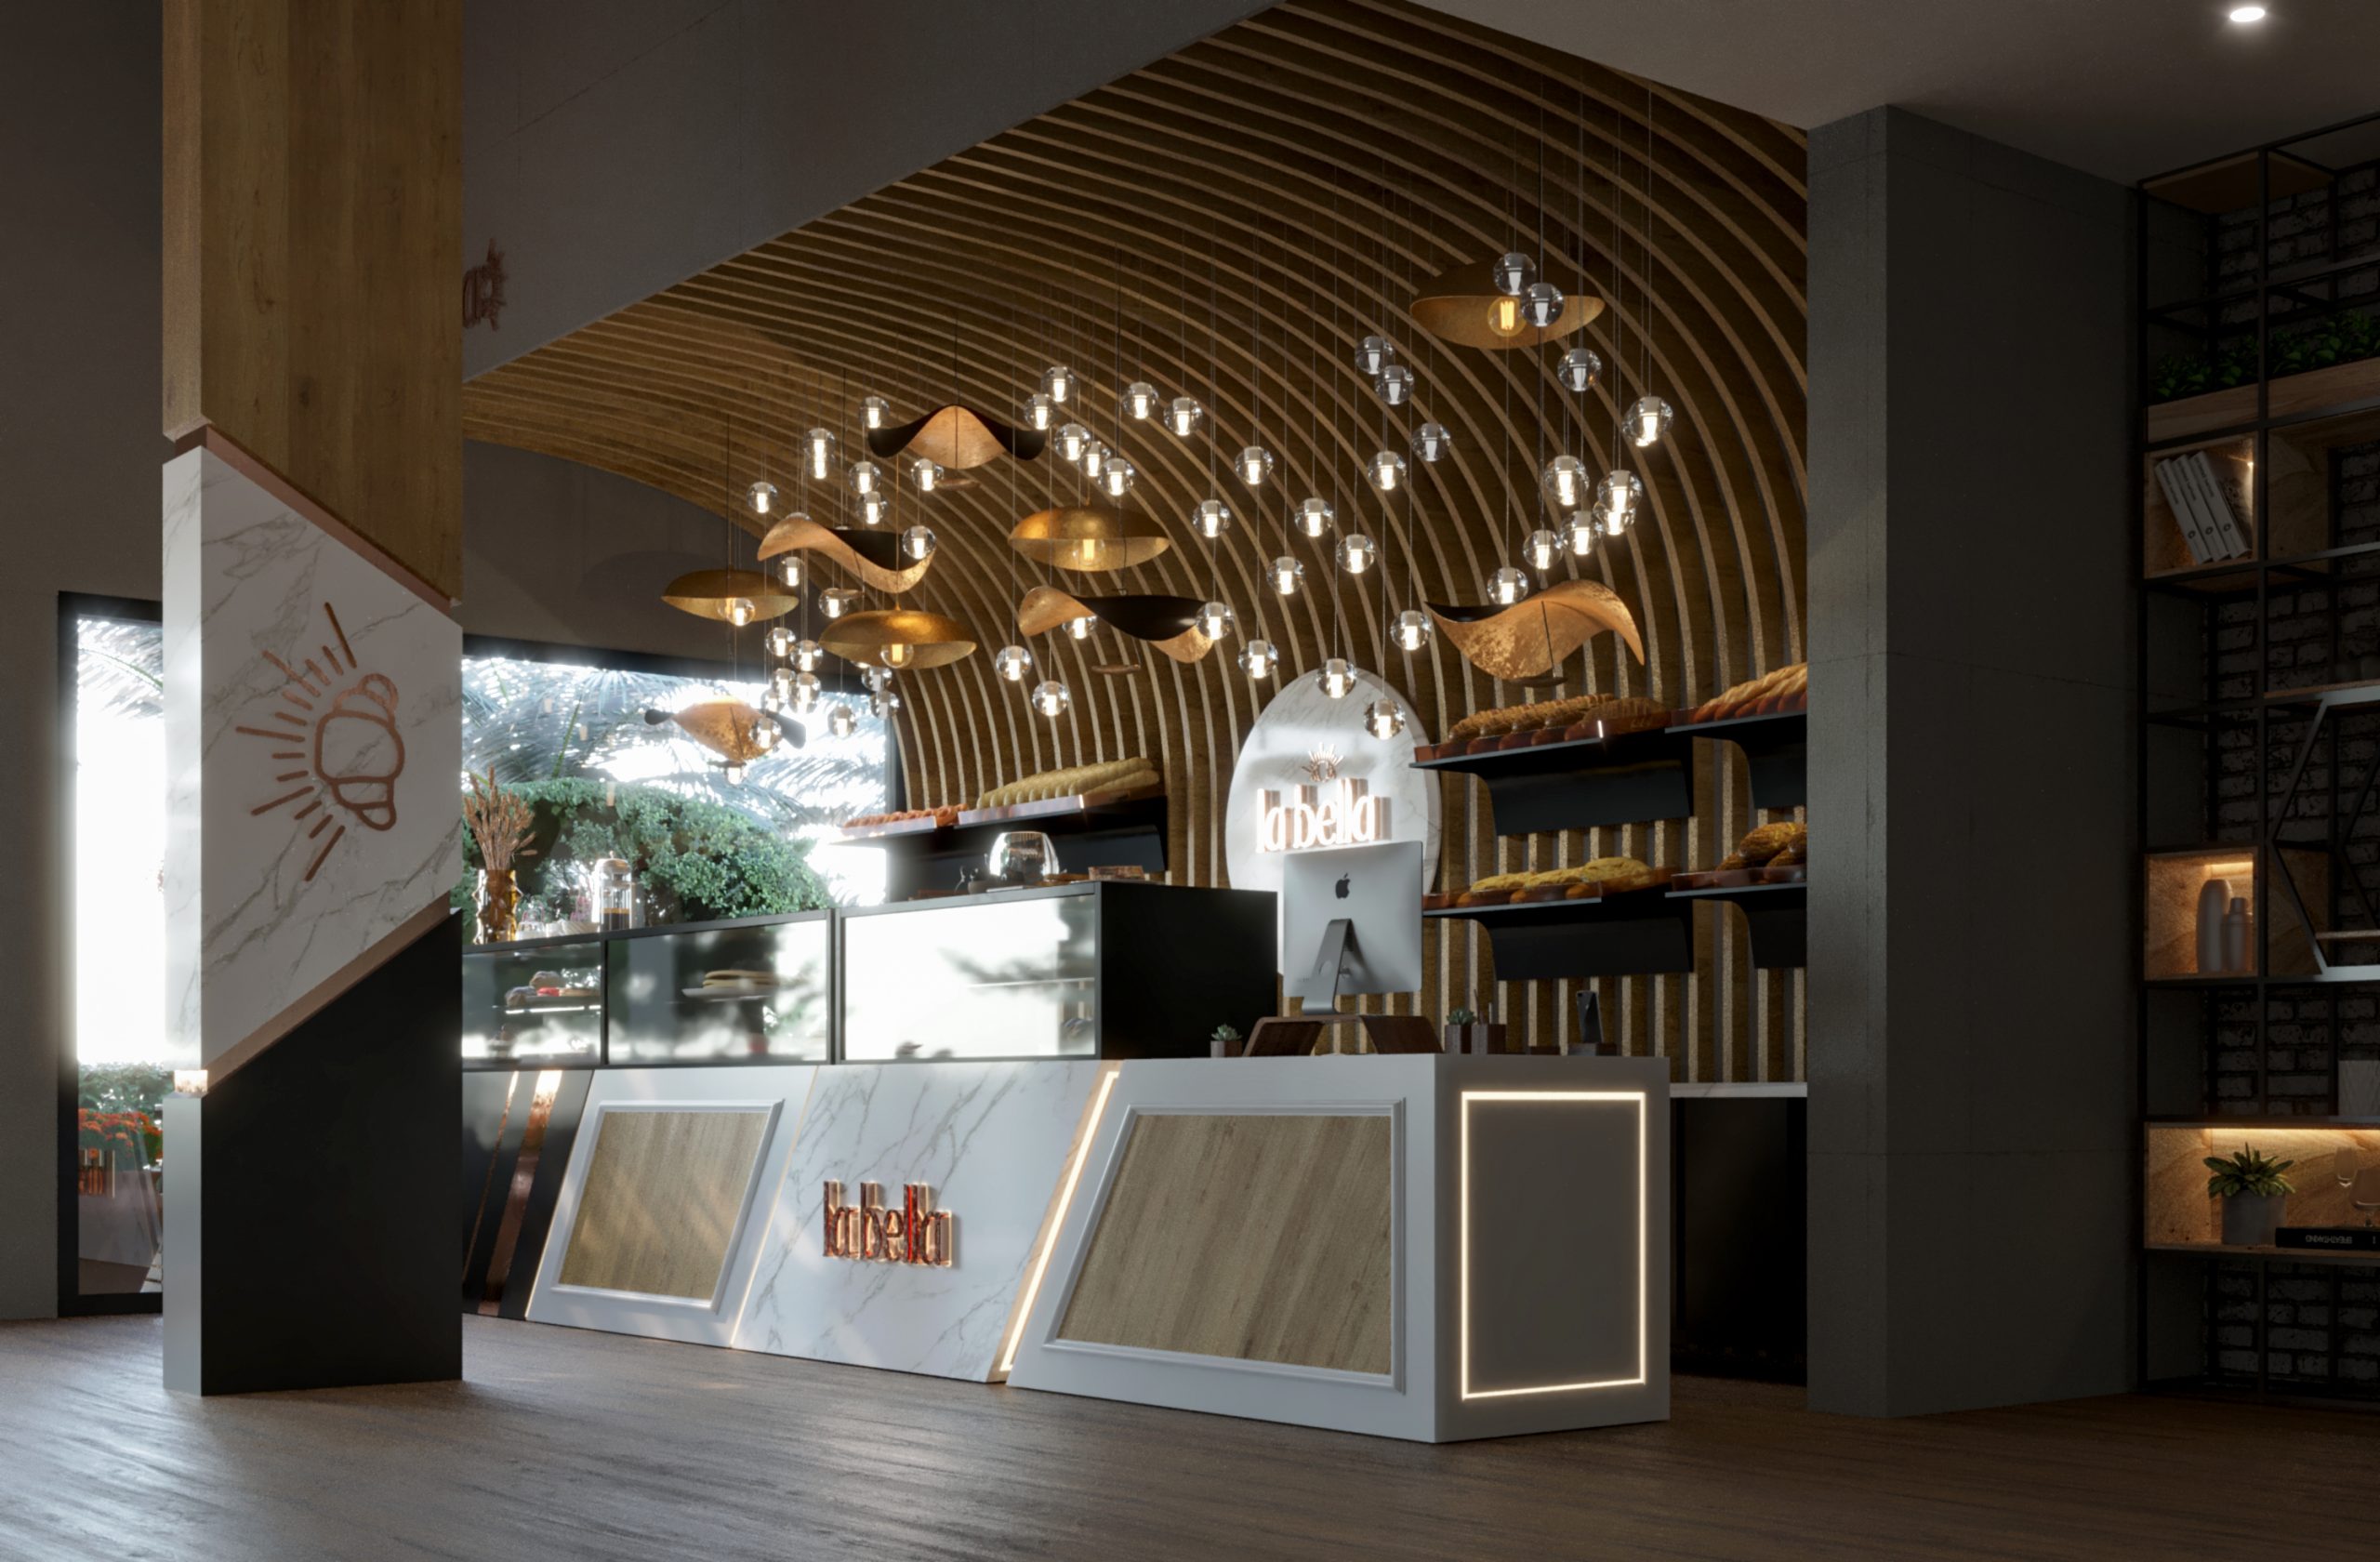 LABELLA BAKERY (CYPRUS) - curved wood - rose gold - bakery shop - hrarchz 